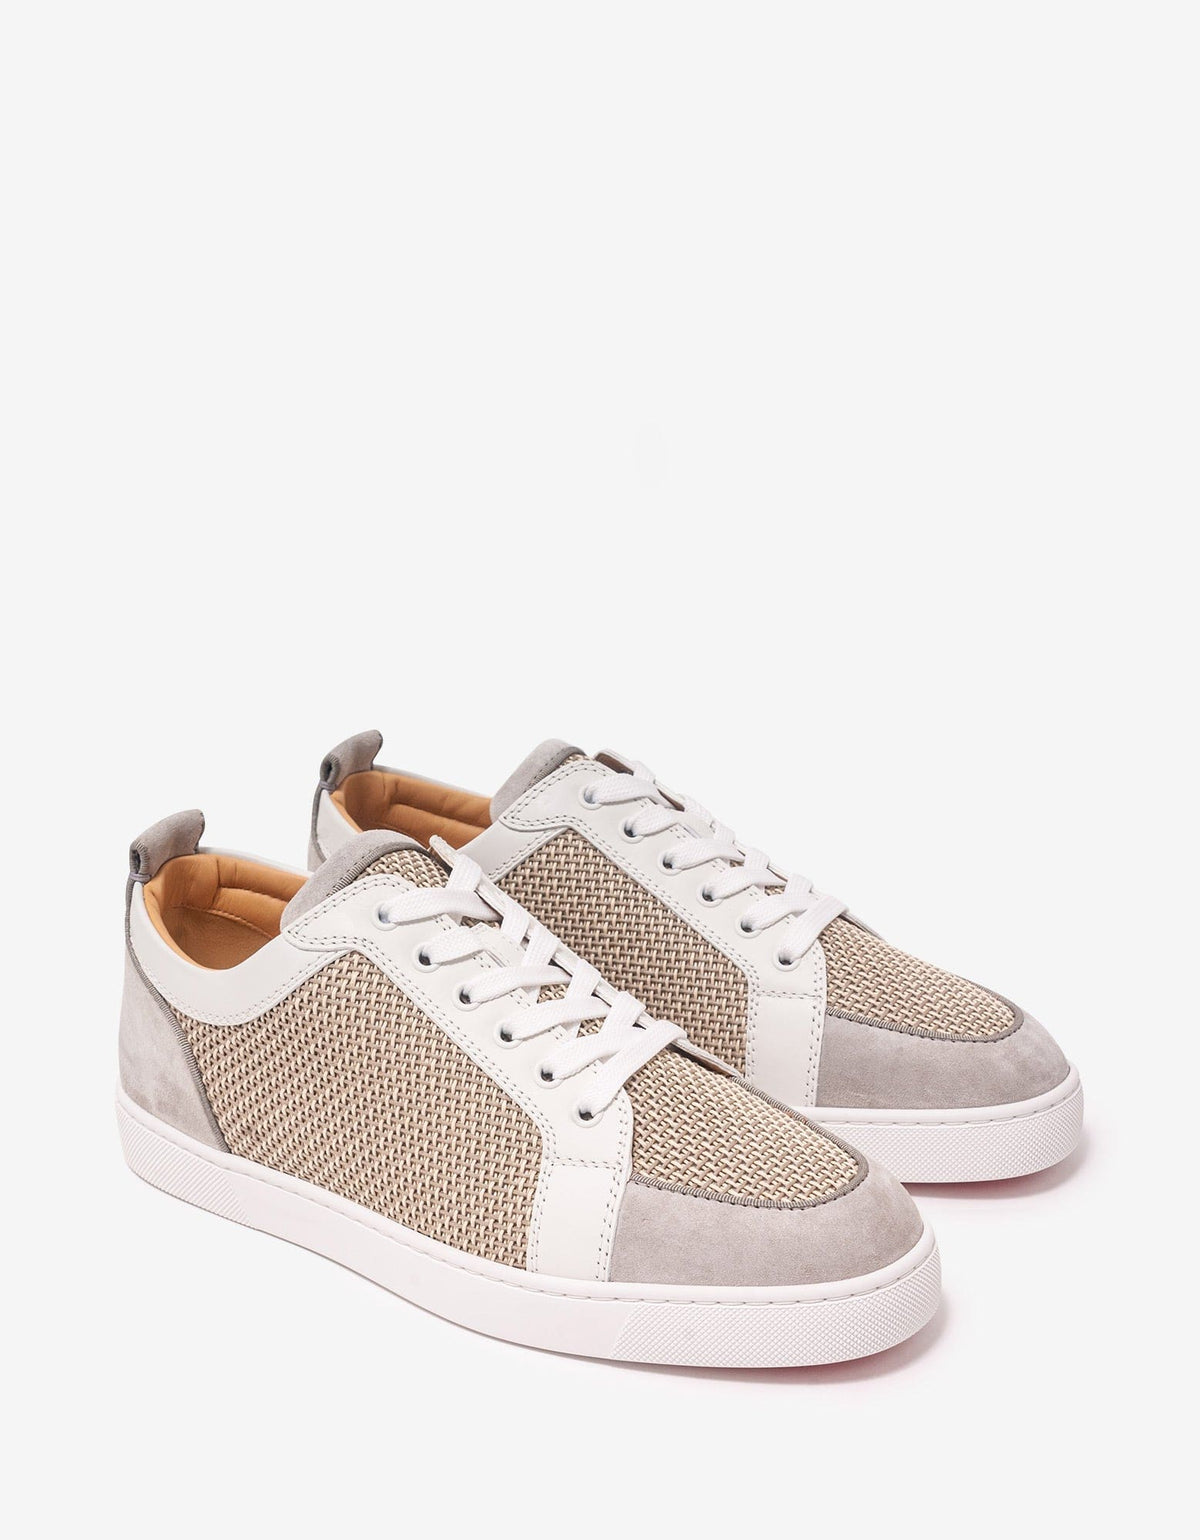 Christian Louboutin Rantulow Grey & Champagne Trainers -